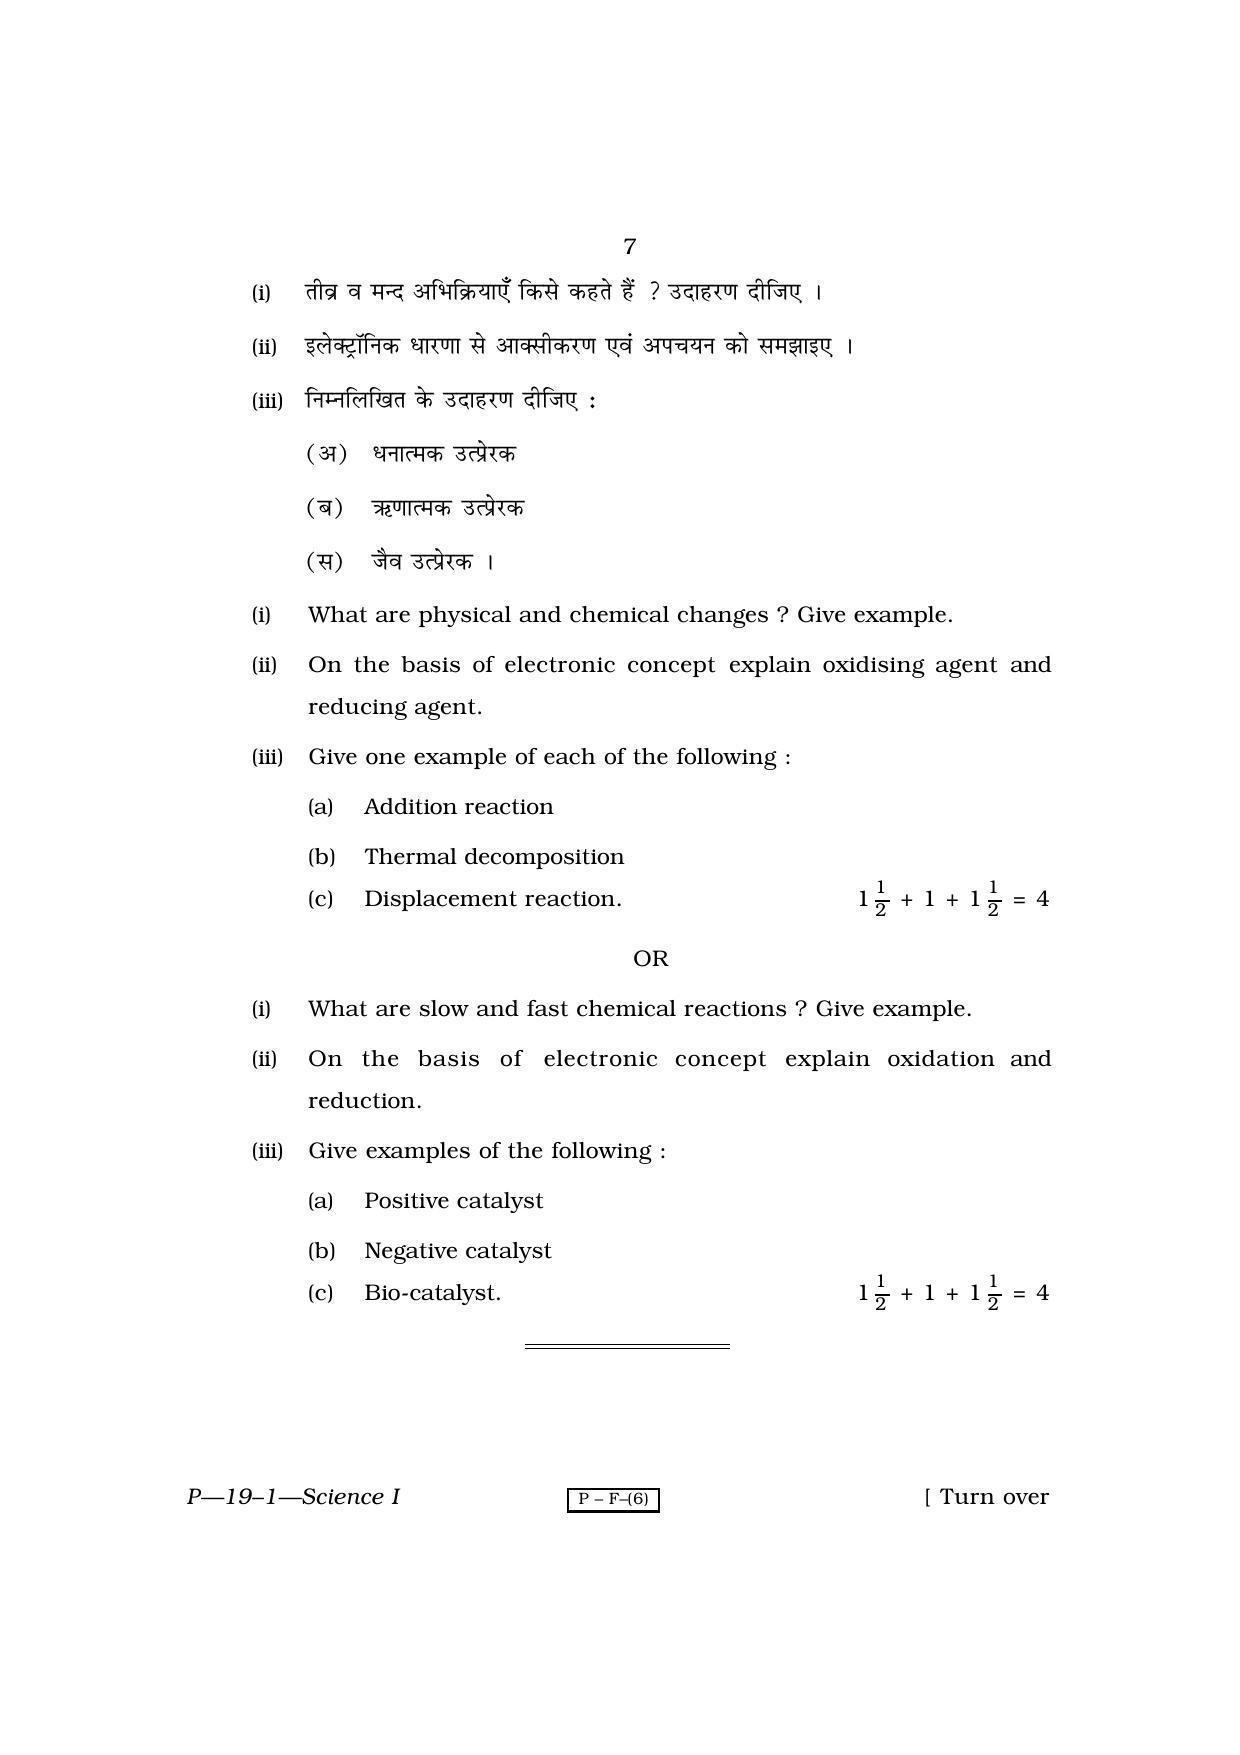 RBSE 2010 Science - I Praveshika Question Paper - Page 7